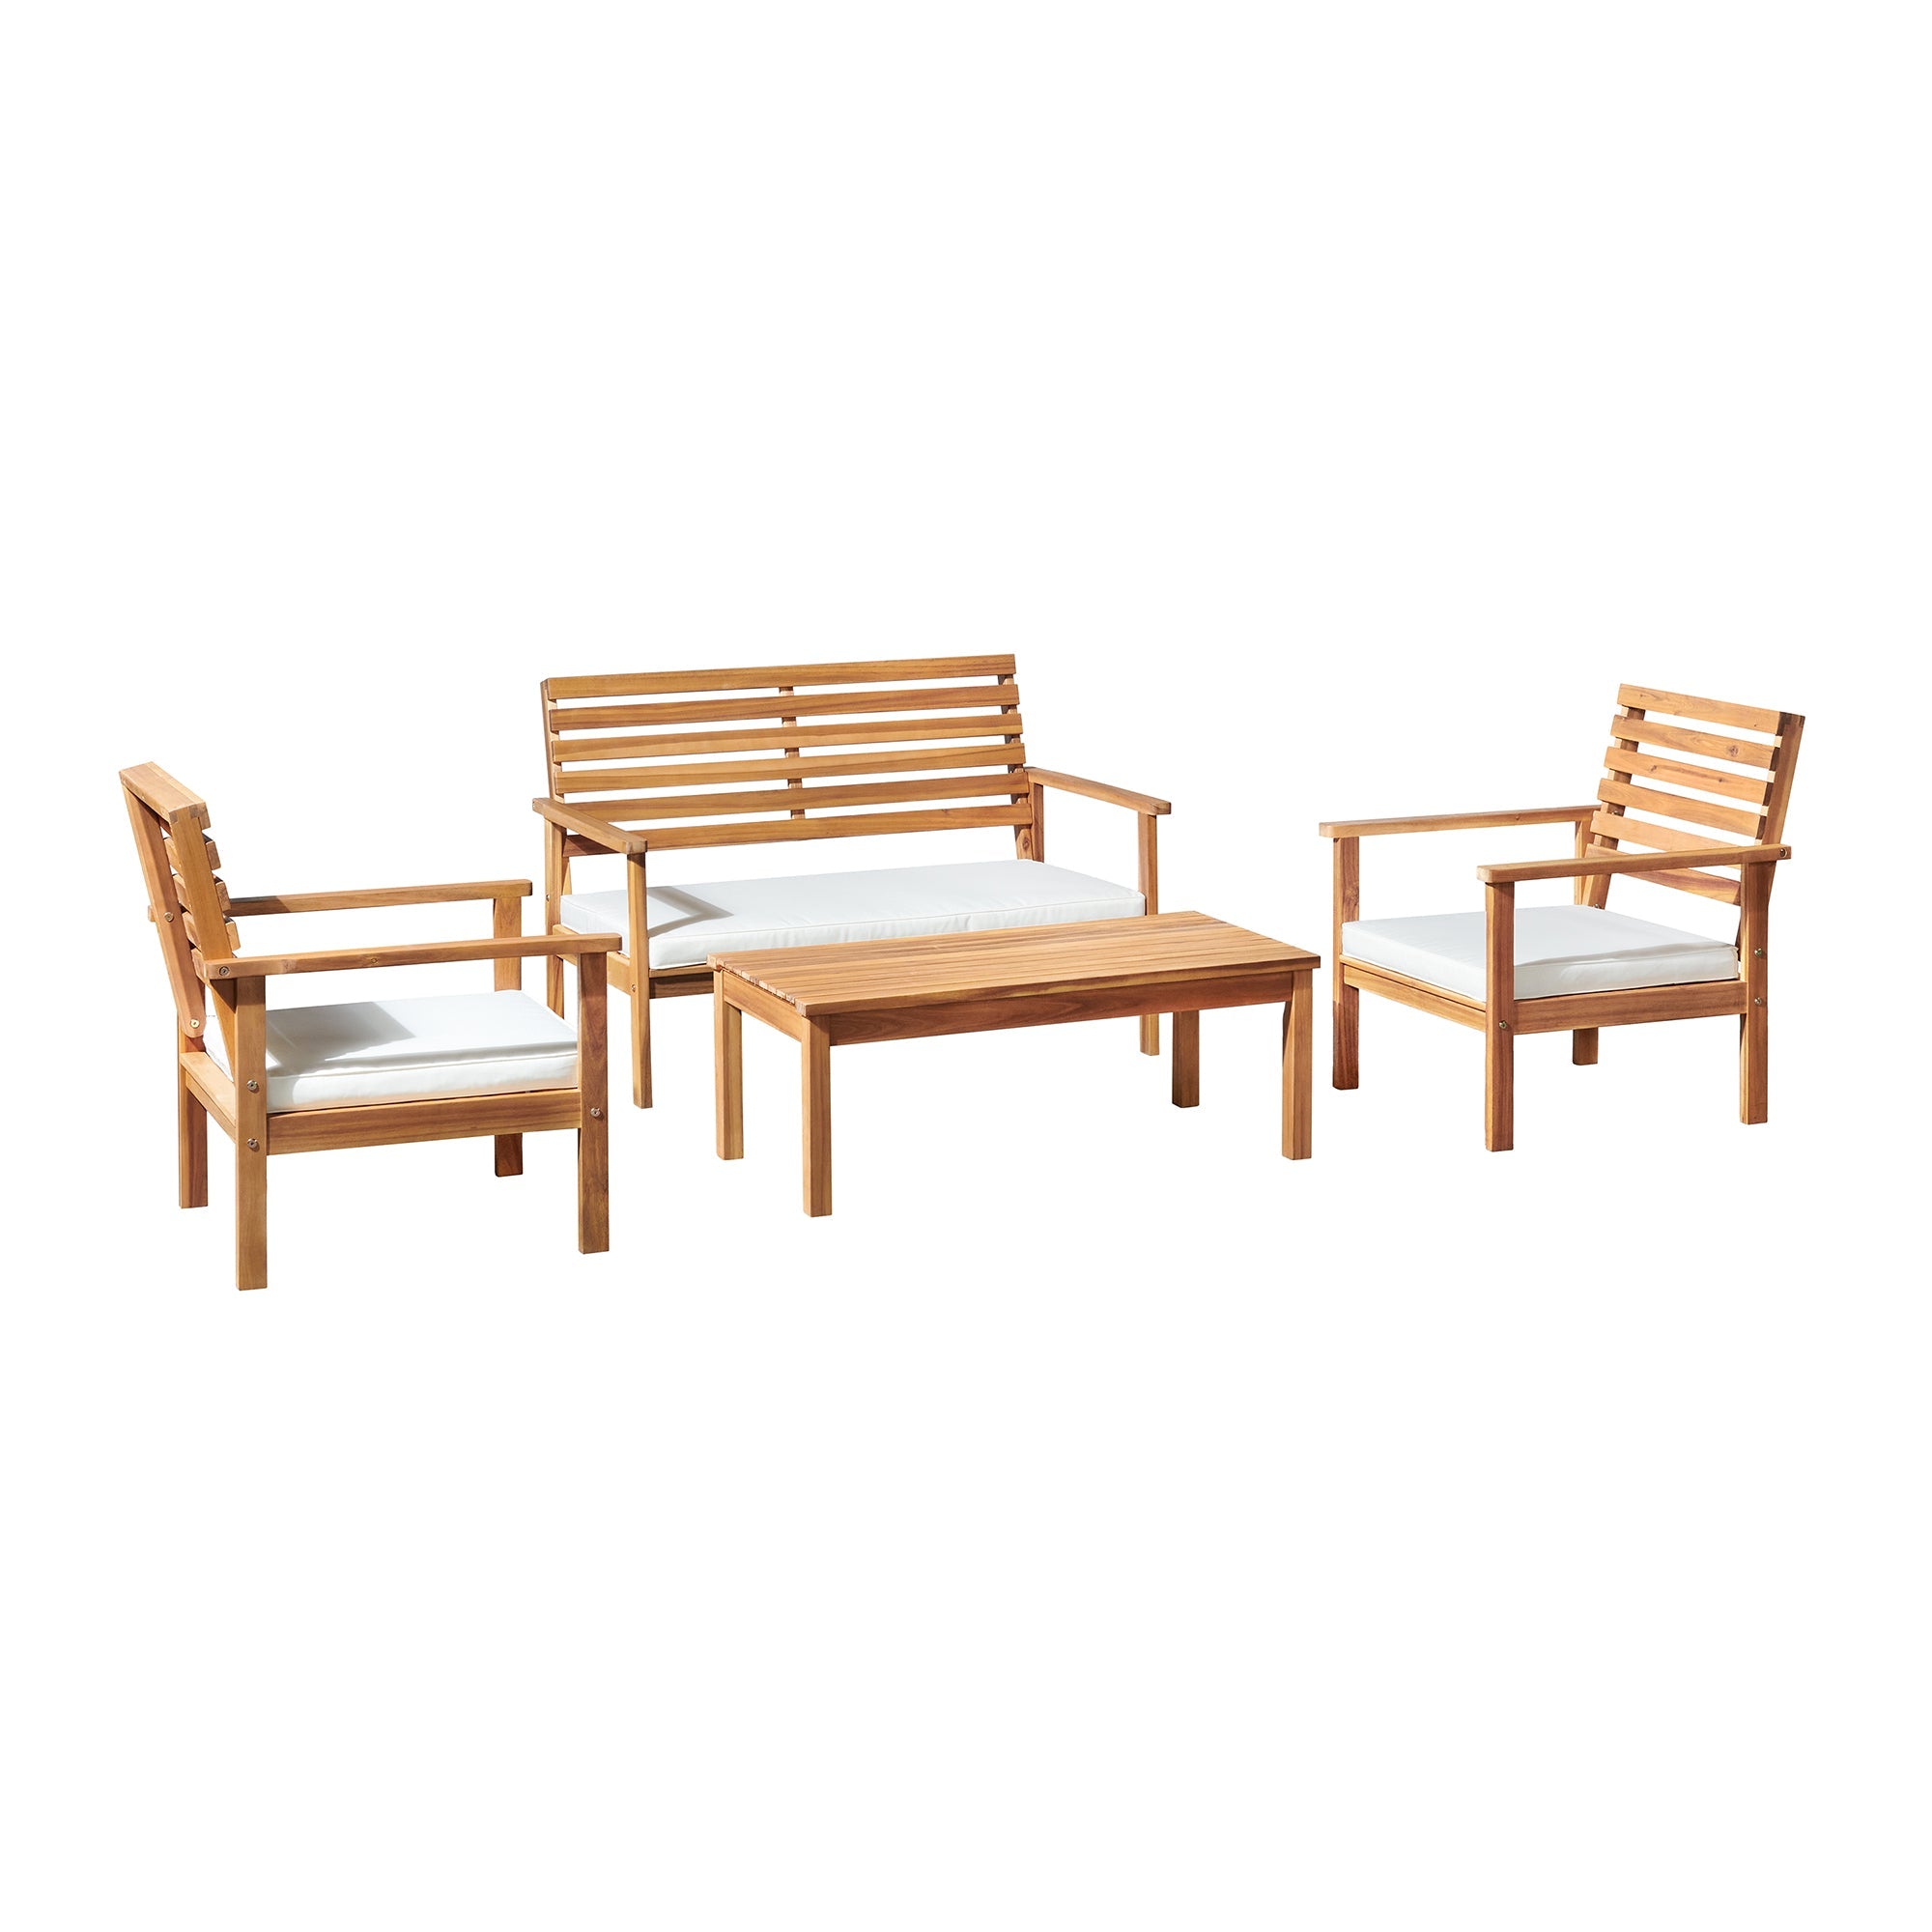 Orwell Outdoor Acacia Wood Conversation Set with Bench and Two Chairs with Cushions and Cocktail Table, Set of 4 - Outdoor Seating